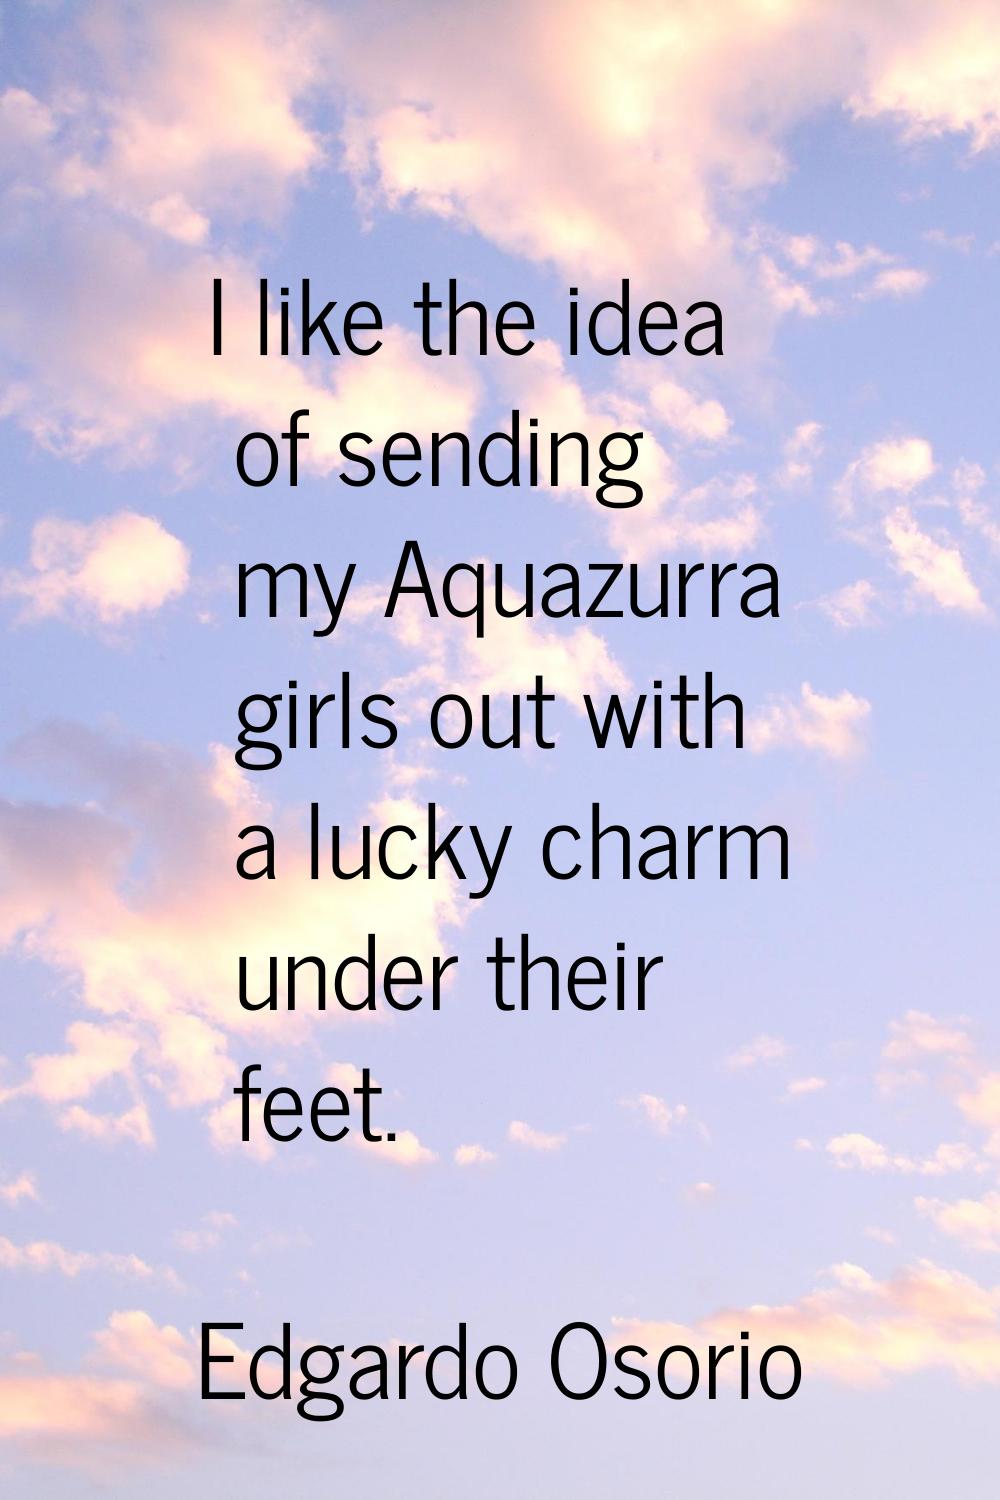 I like the idea of sending my Aquazurra girls out with a lucky charm under their feet.